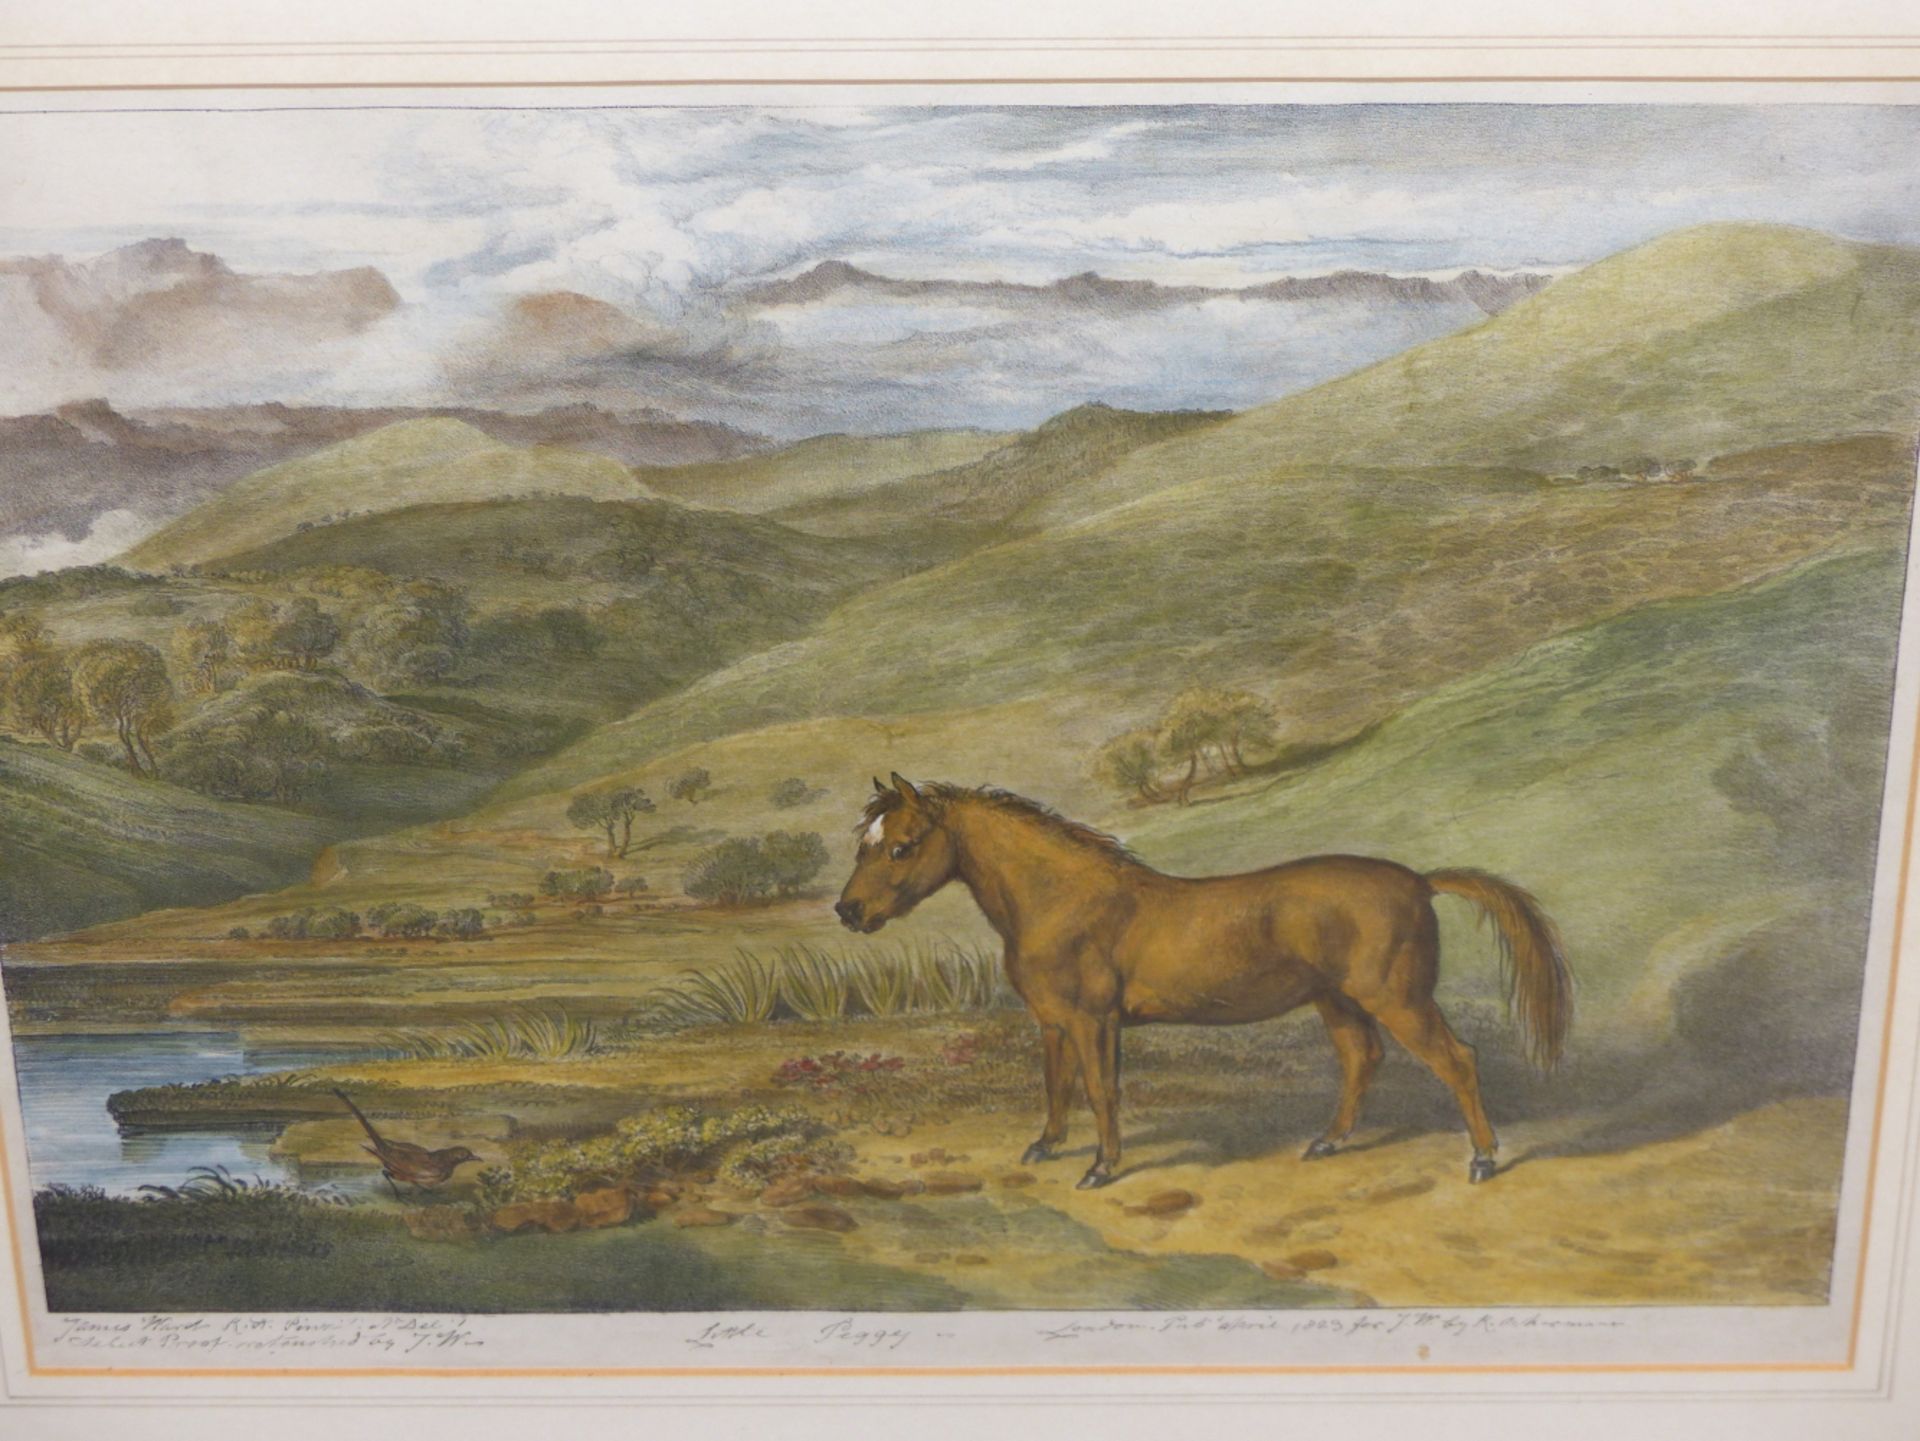 19th C. ENGLISH SCHOOL DANIEL O'ROUKE WINNING HE DERBY 1852, REPUTEDLY BY JAMES G. NOBLE, - Image 25 of 26